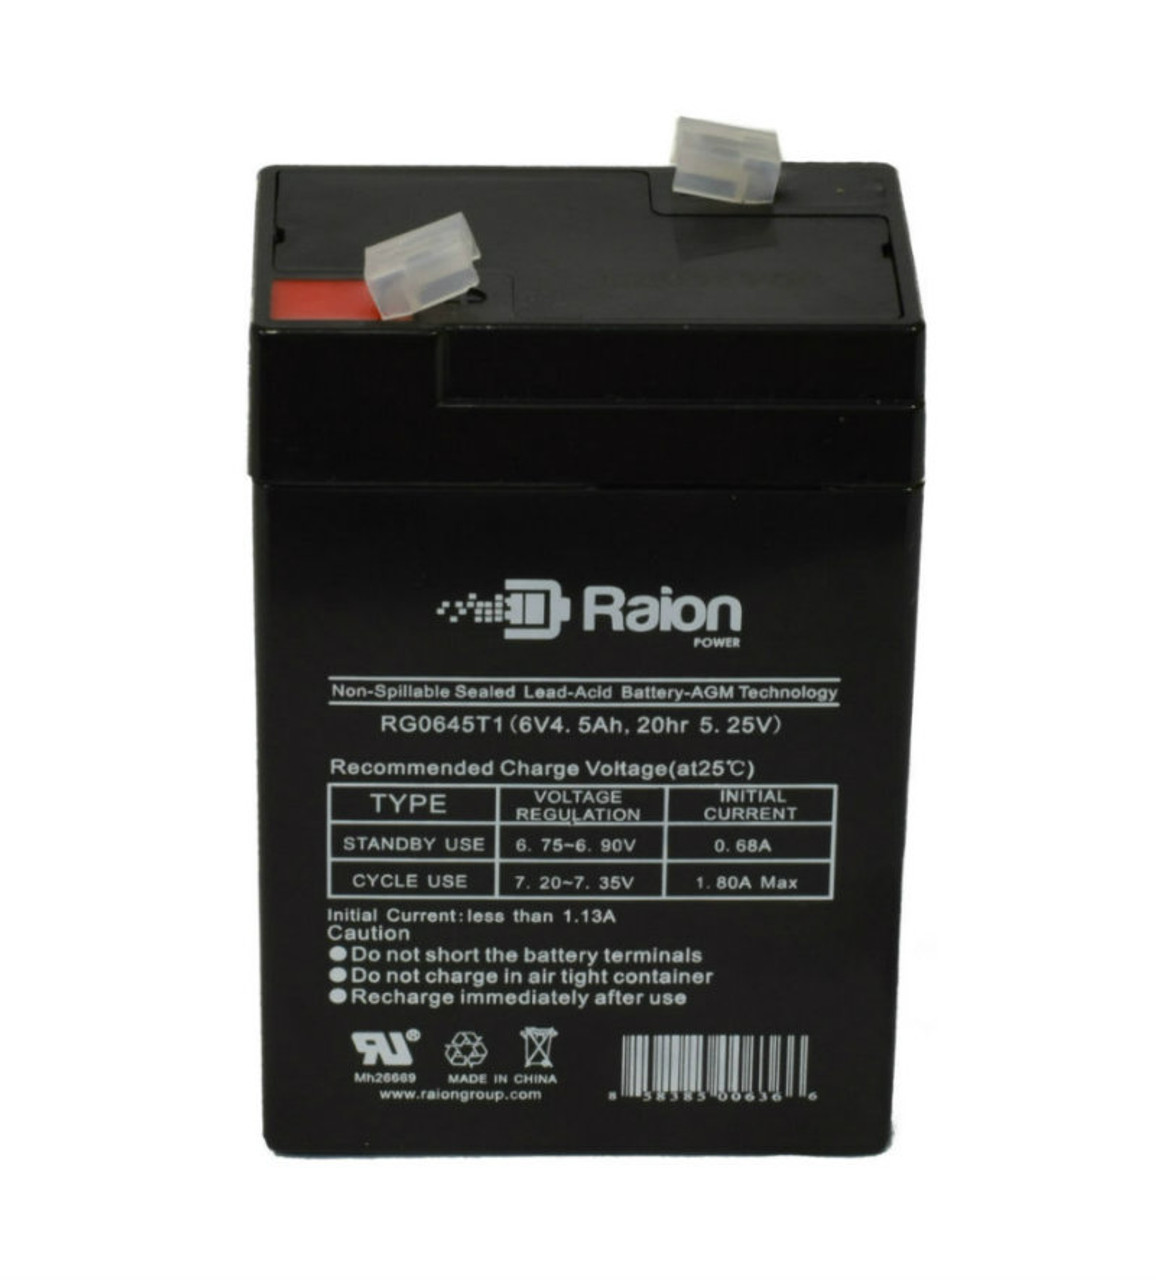 Raion Power RG0645T1 Replacement Battery Cartridge for Jasco RB640